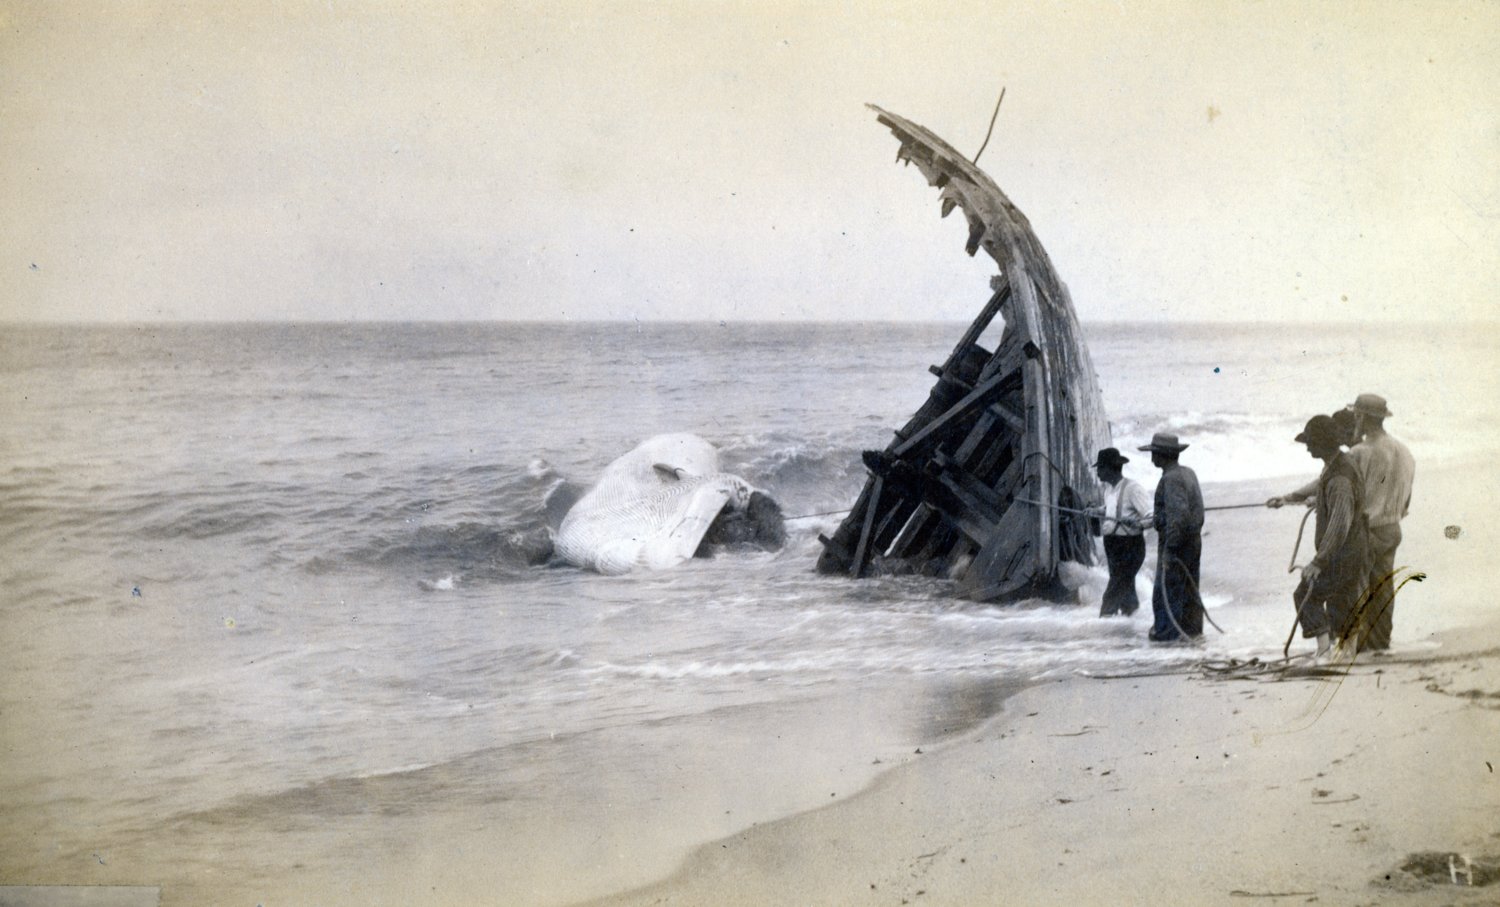 The remains of the cargo schooner Warren Sawyer after running aground on the south shore in December 1884.